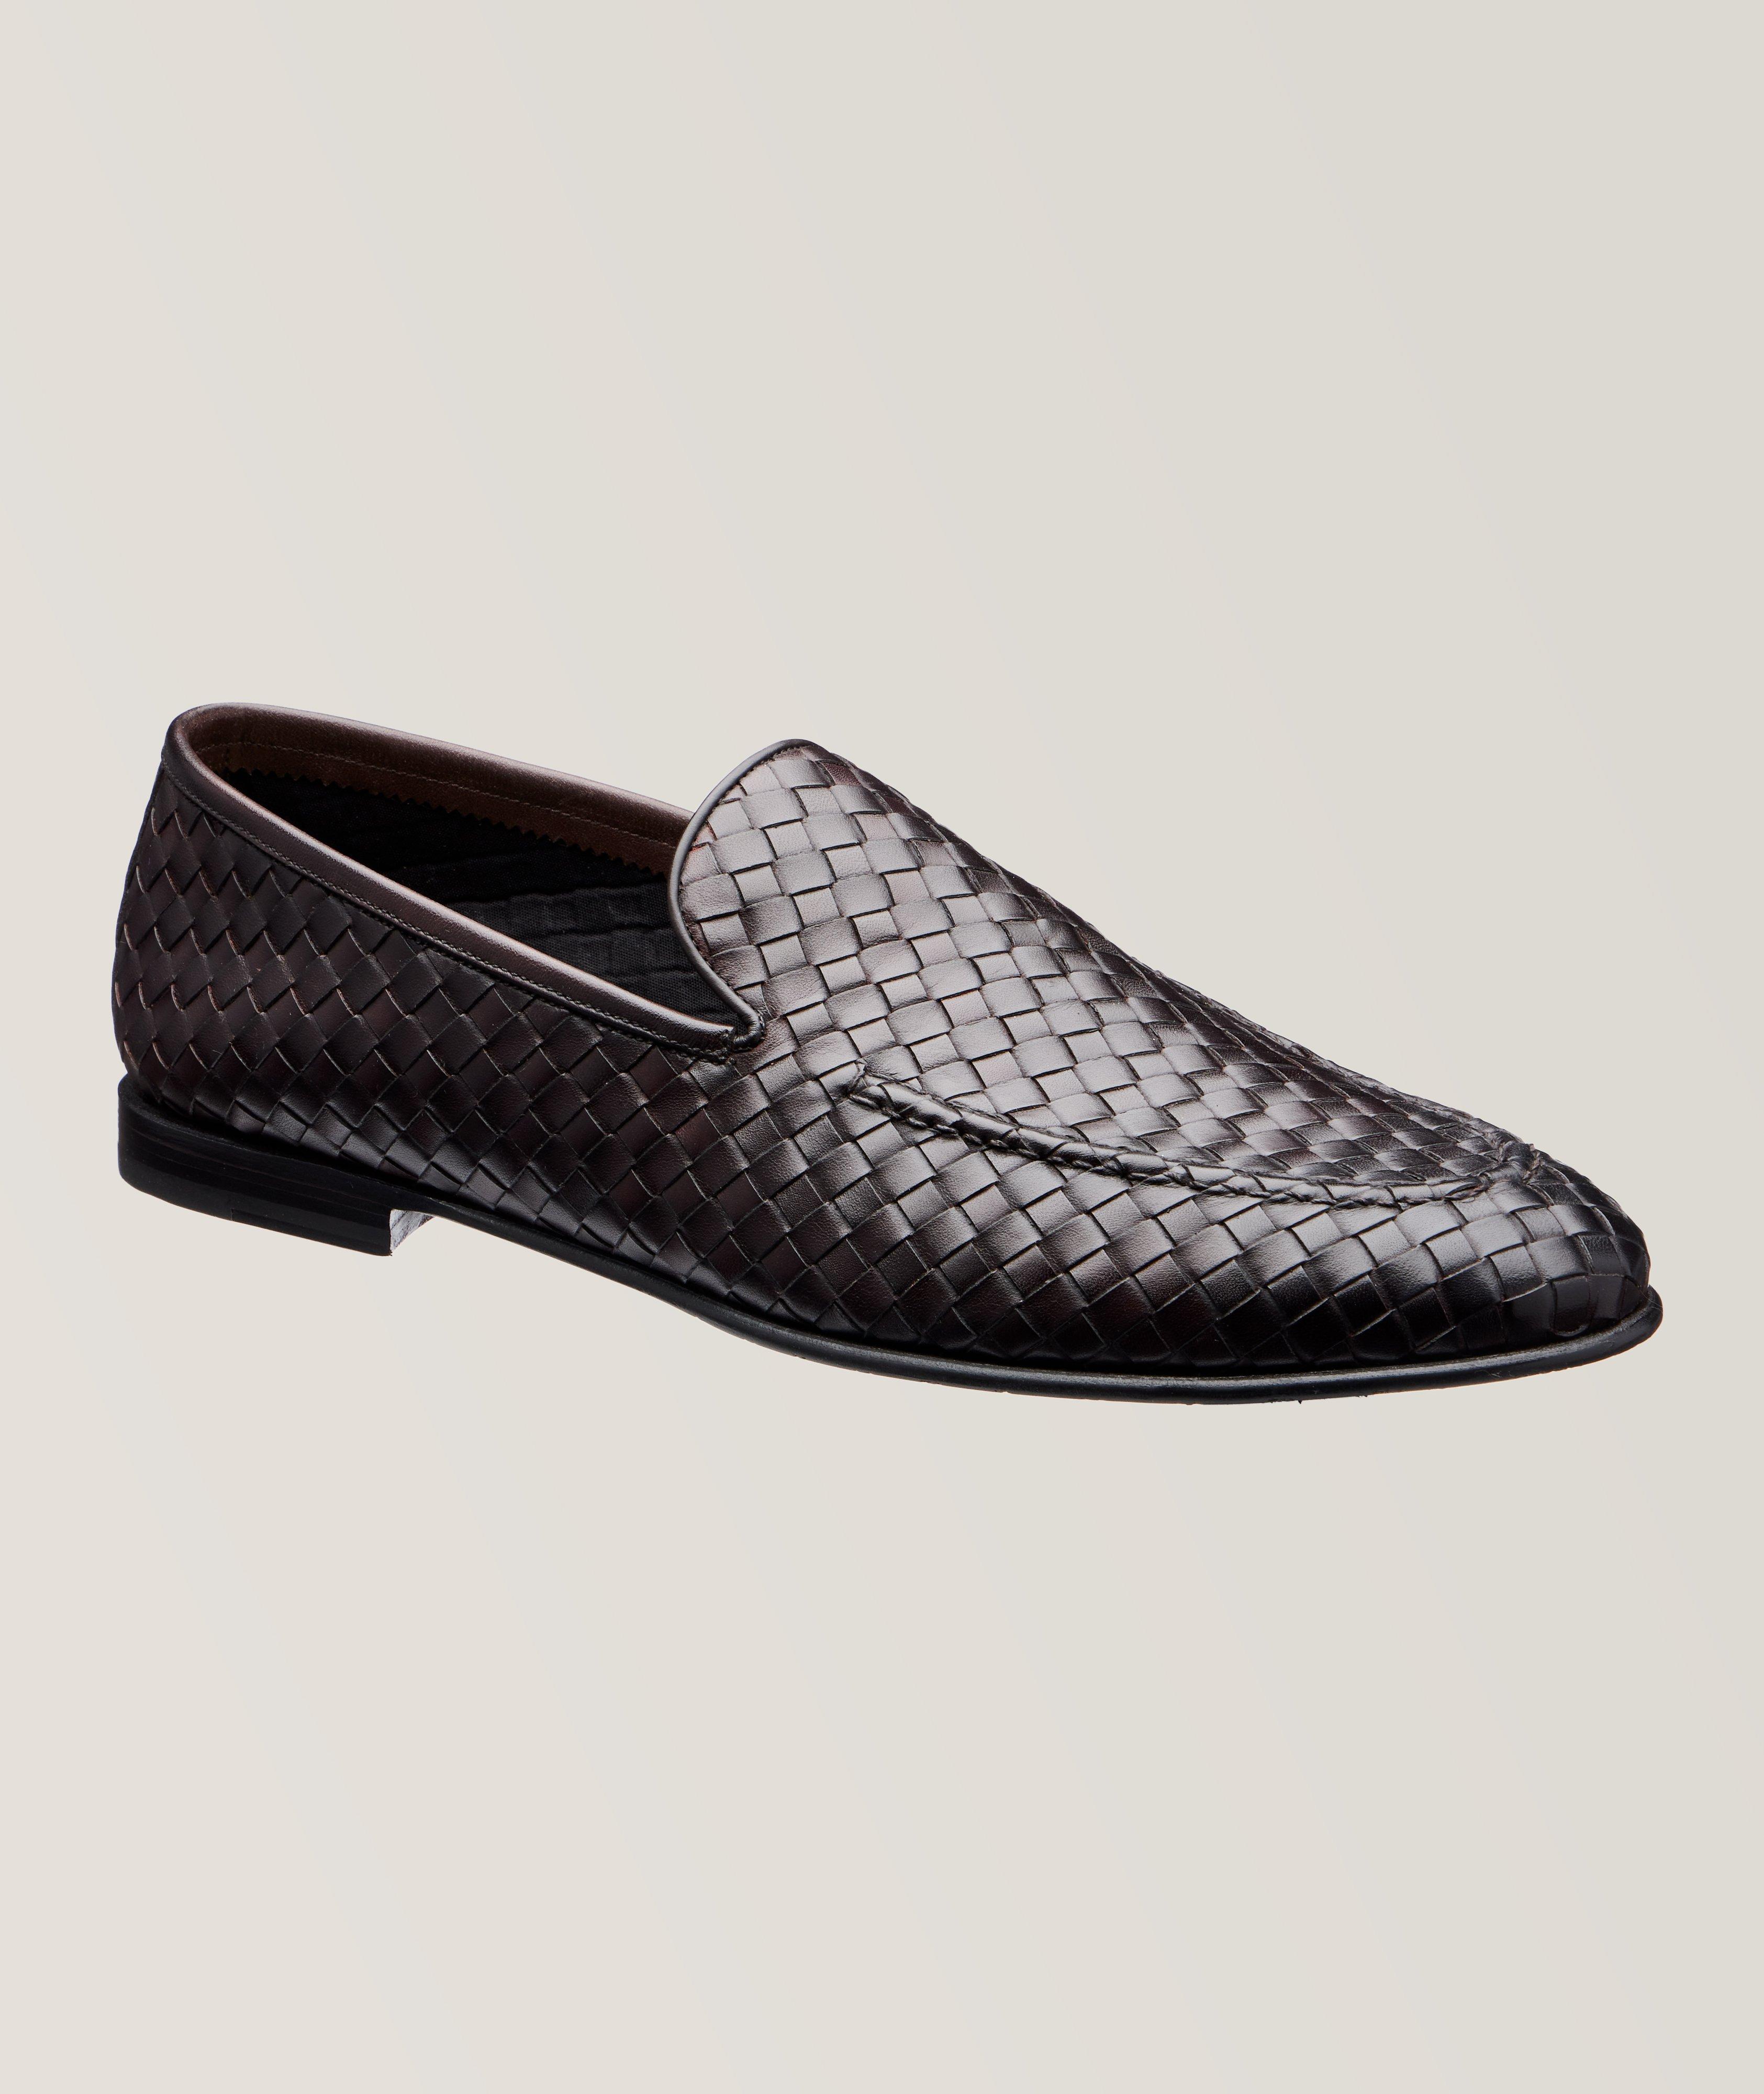 Venetian Woven Leather Loafers image 0